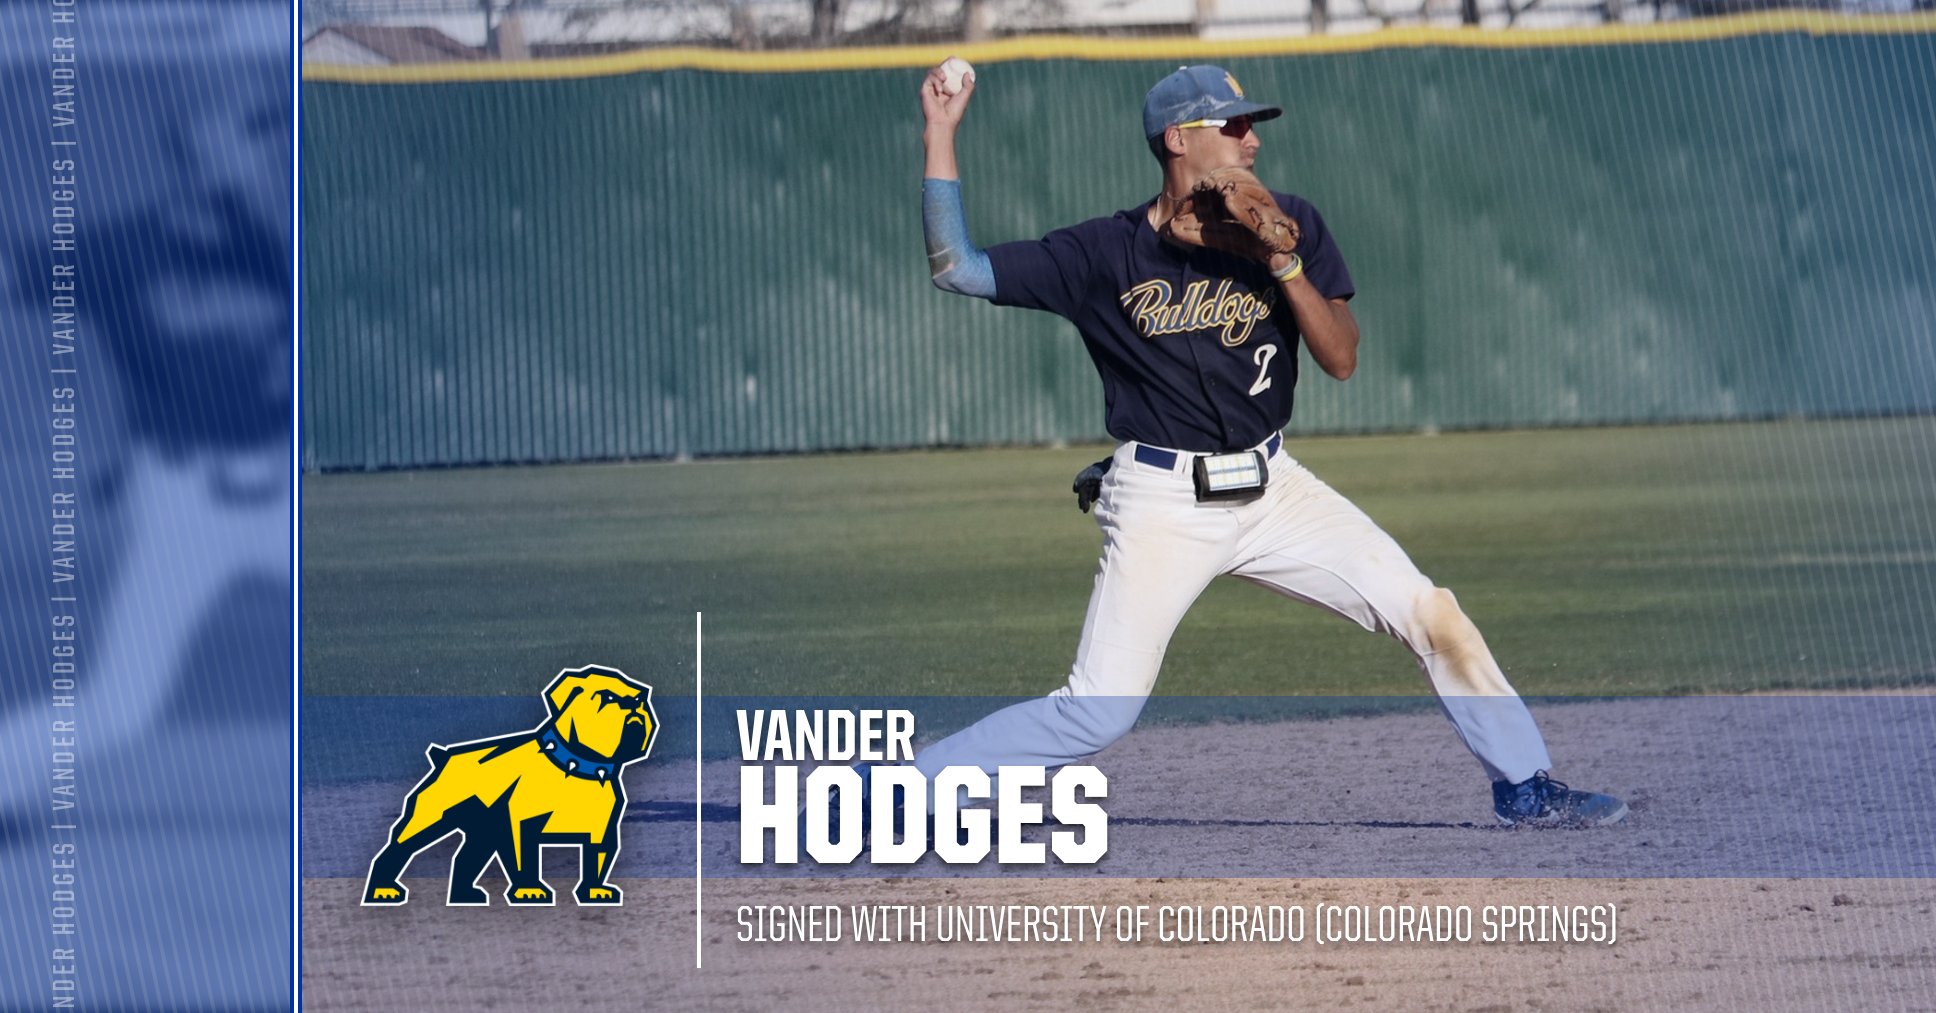 Baseball's Vander Hodges Signs with UCCS